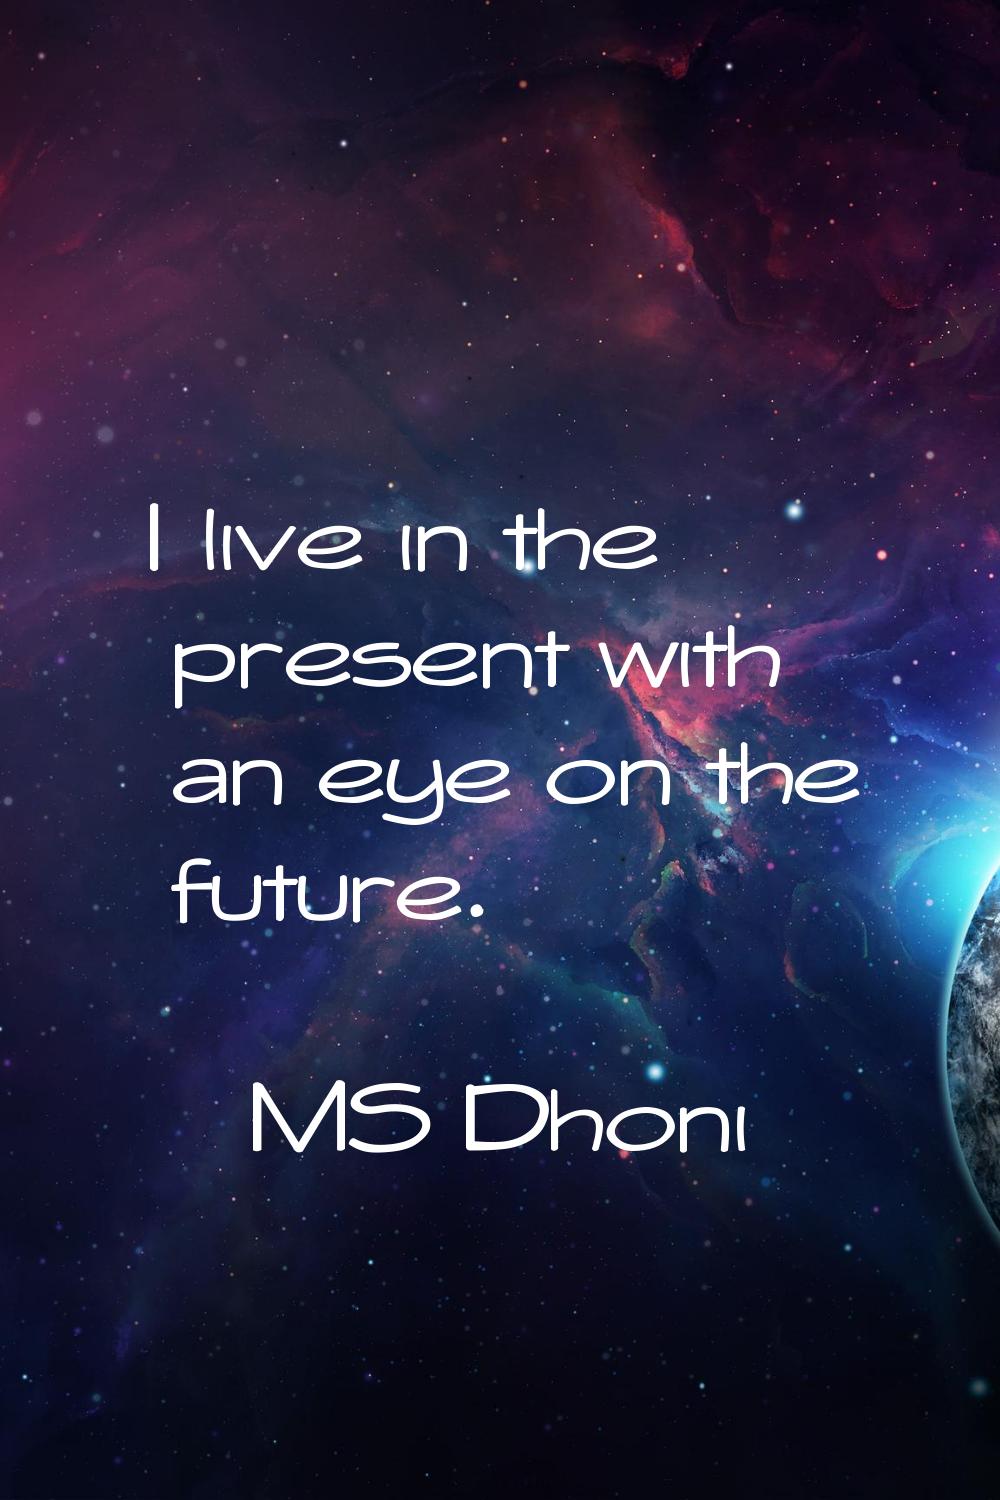 I live in the present with an eye on the future.